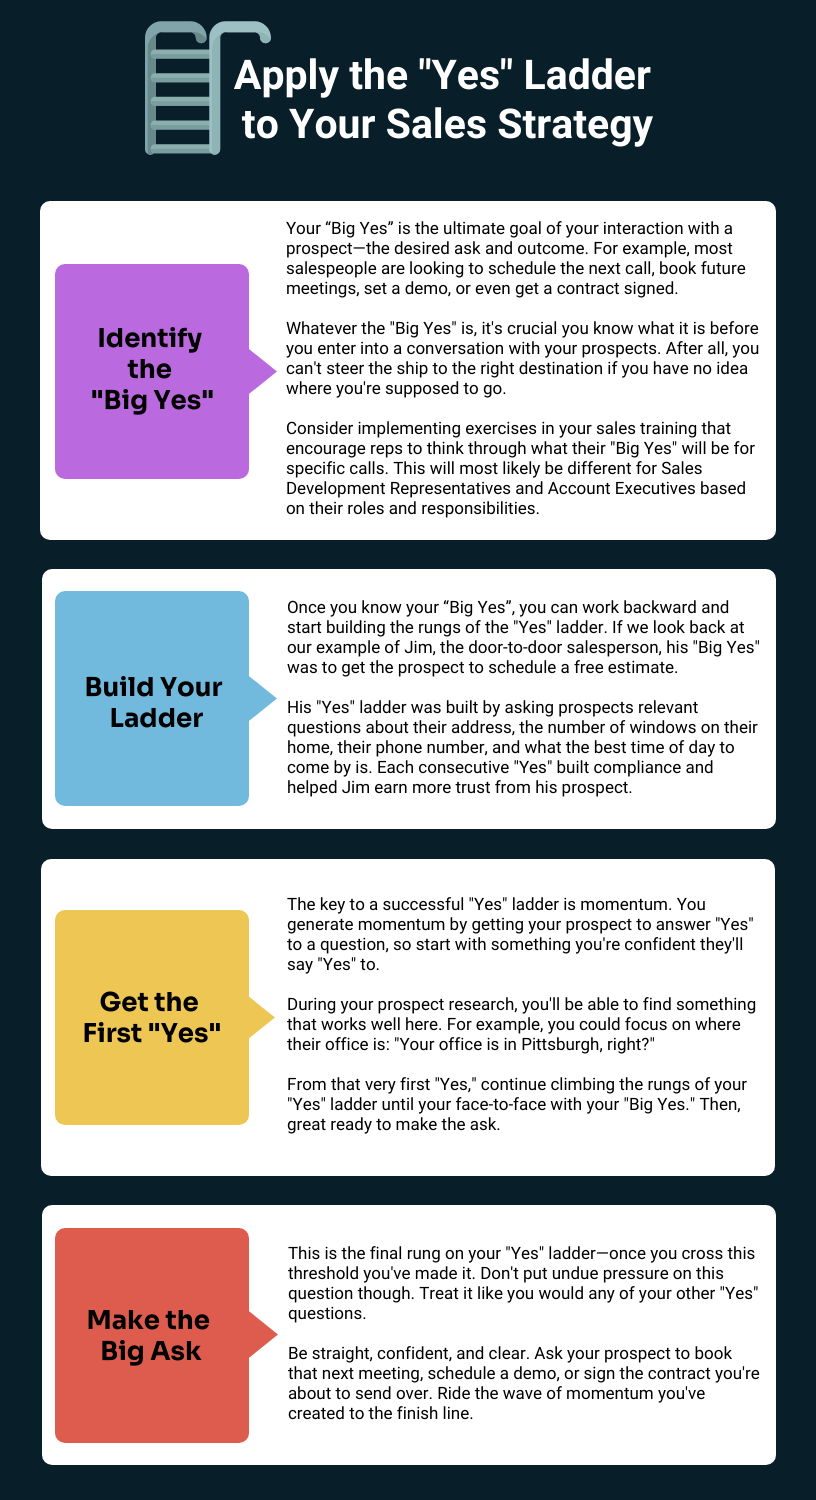 Apply the "Yes" Ladder to your Sales Strategy